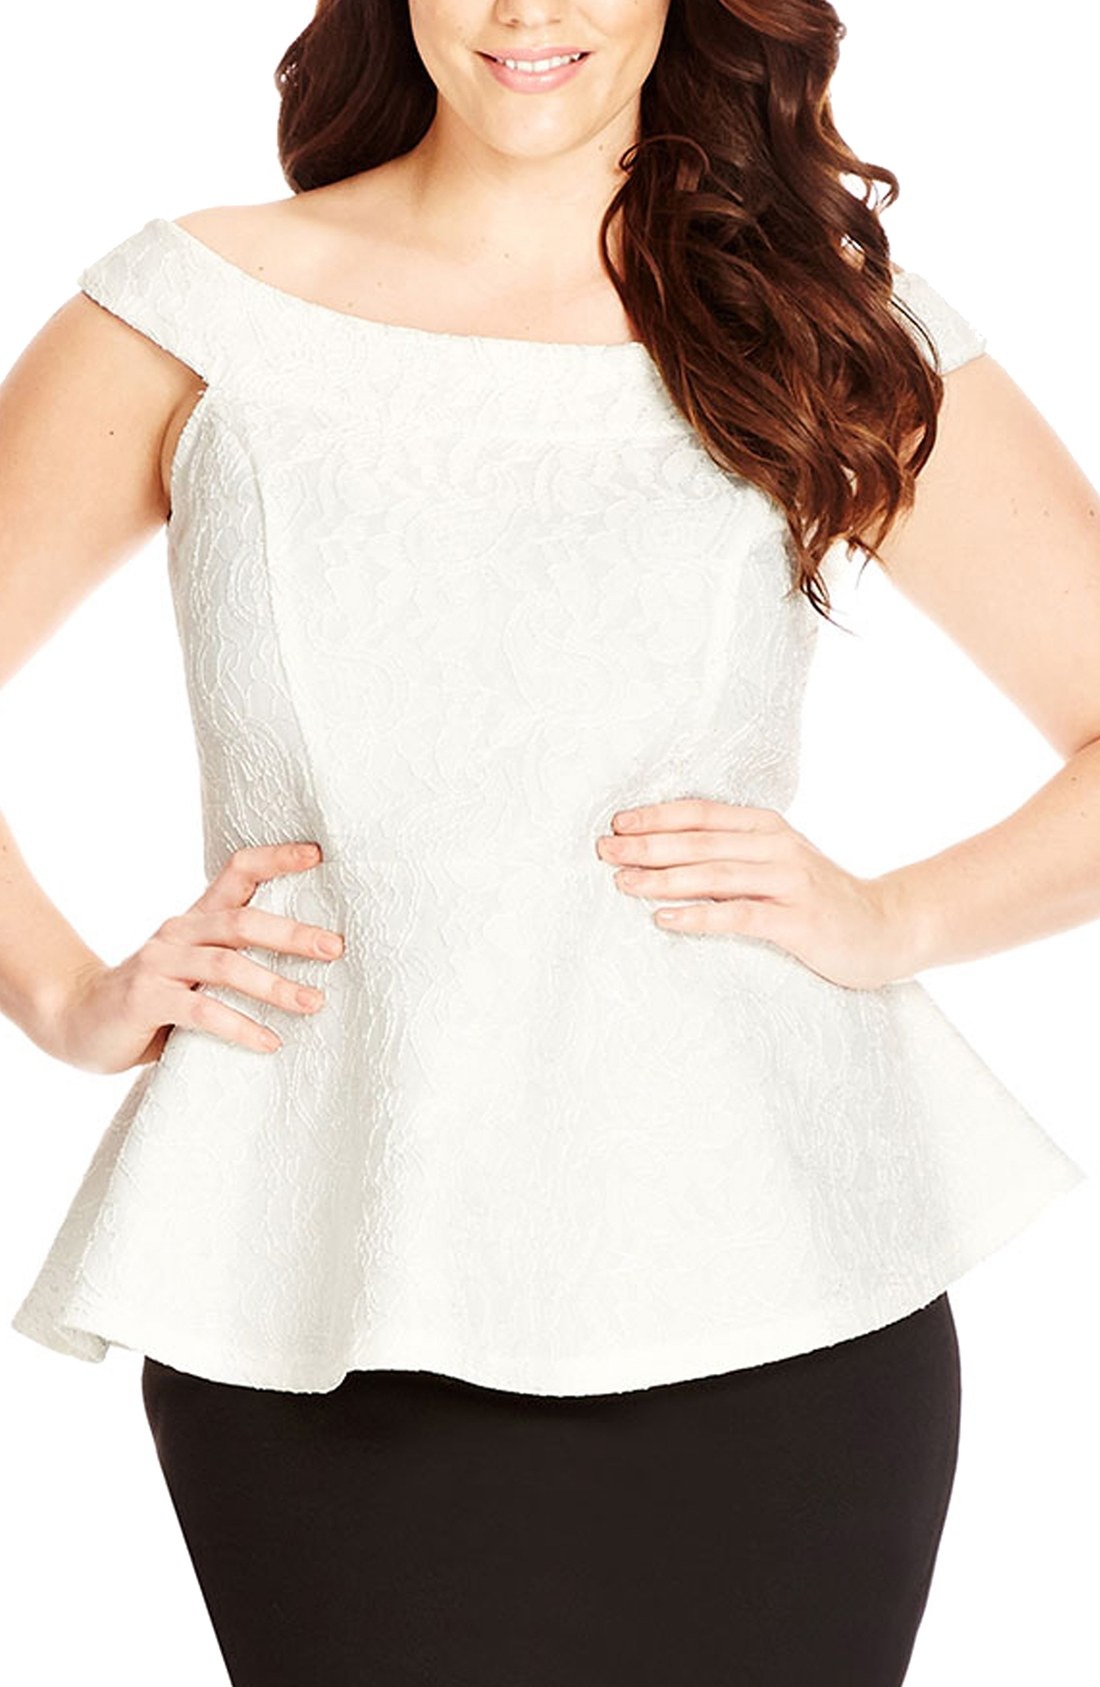 how-to-wear-a-plus-size-peplum-top-in-the-summer-1